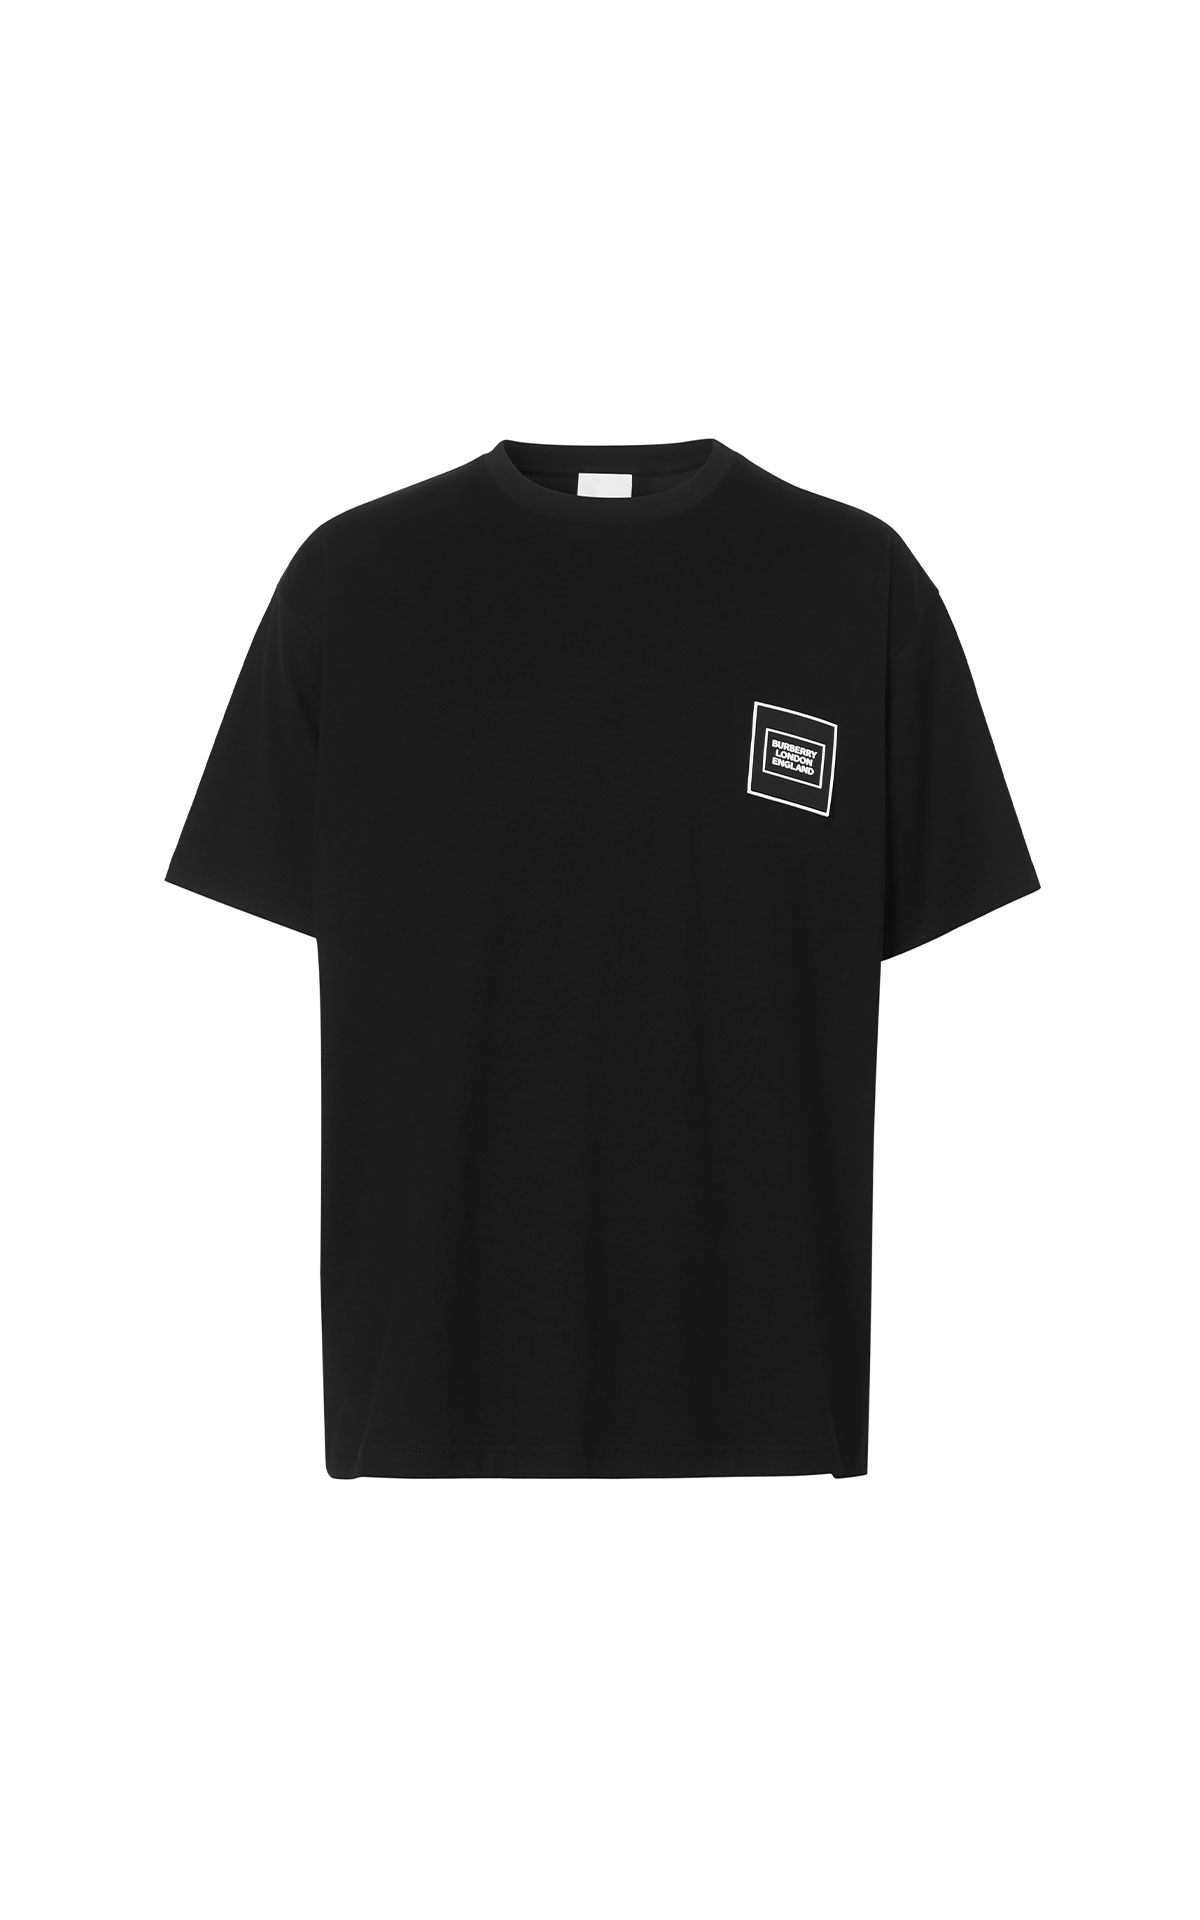 Burberry Logo black t-shirt from Bicester Village